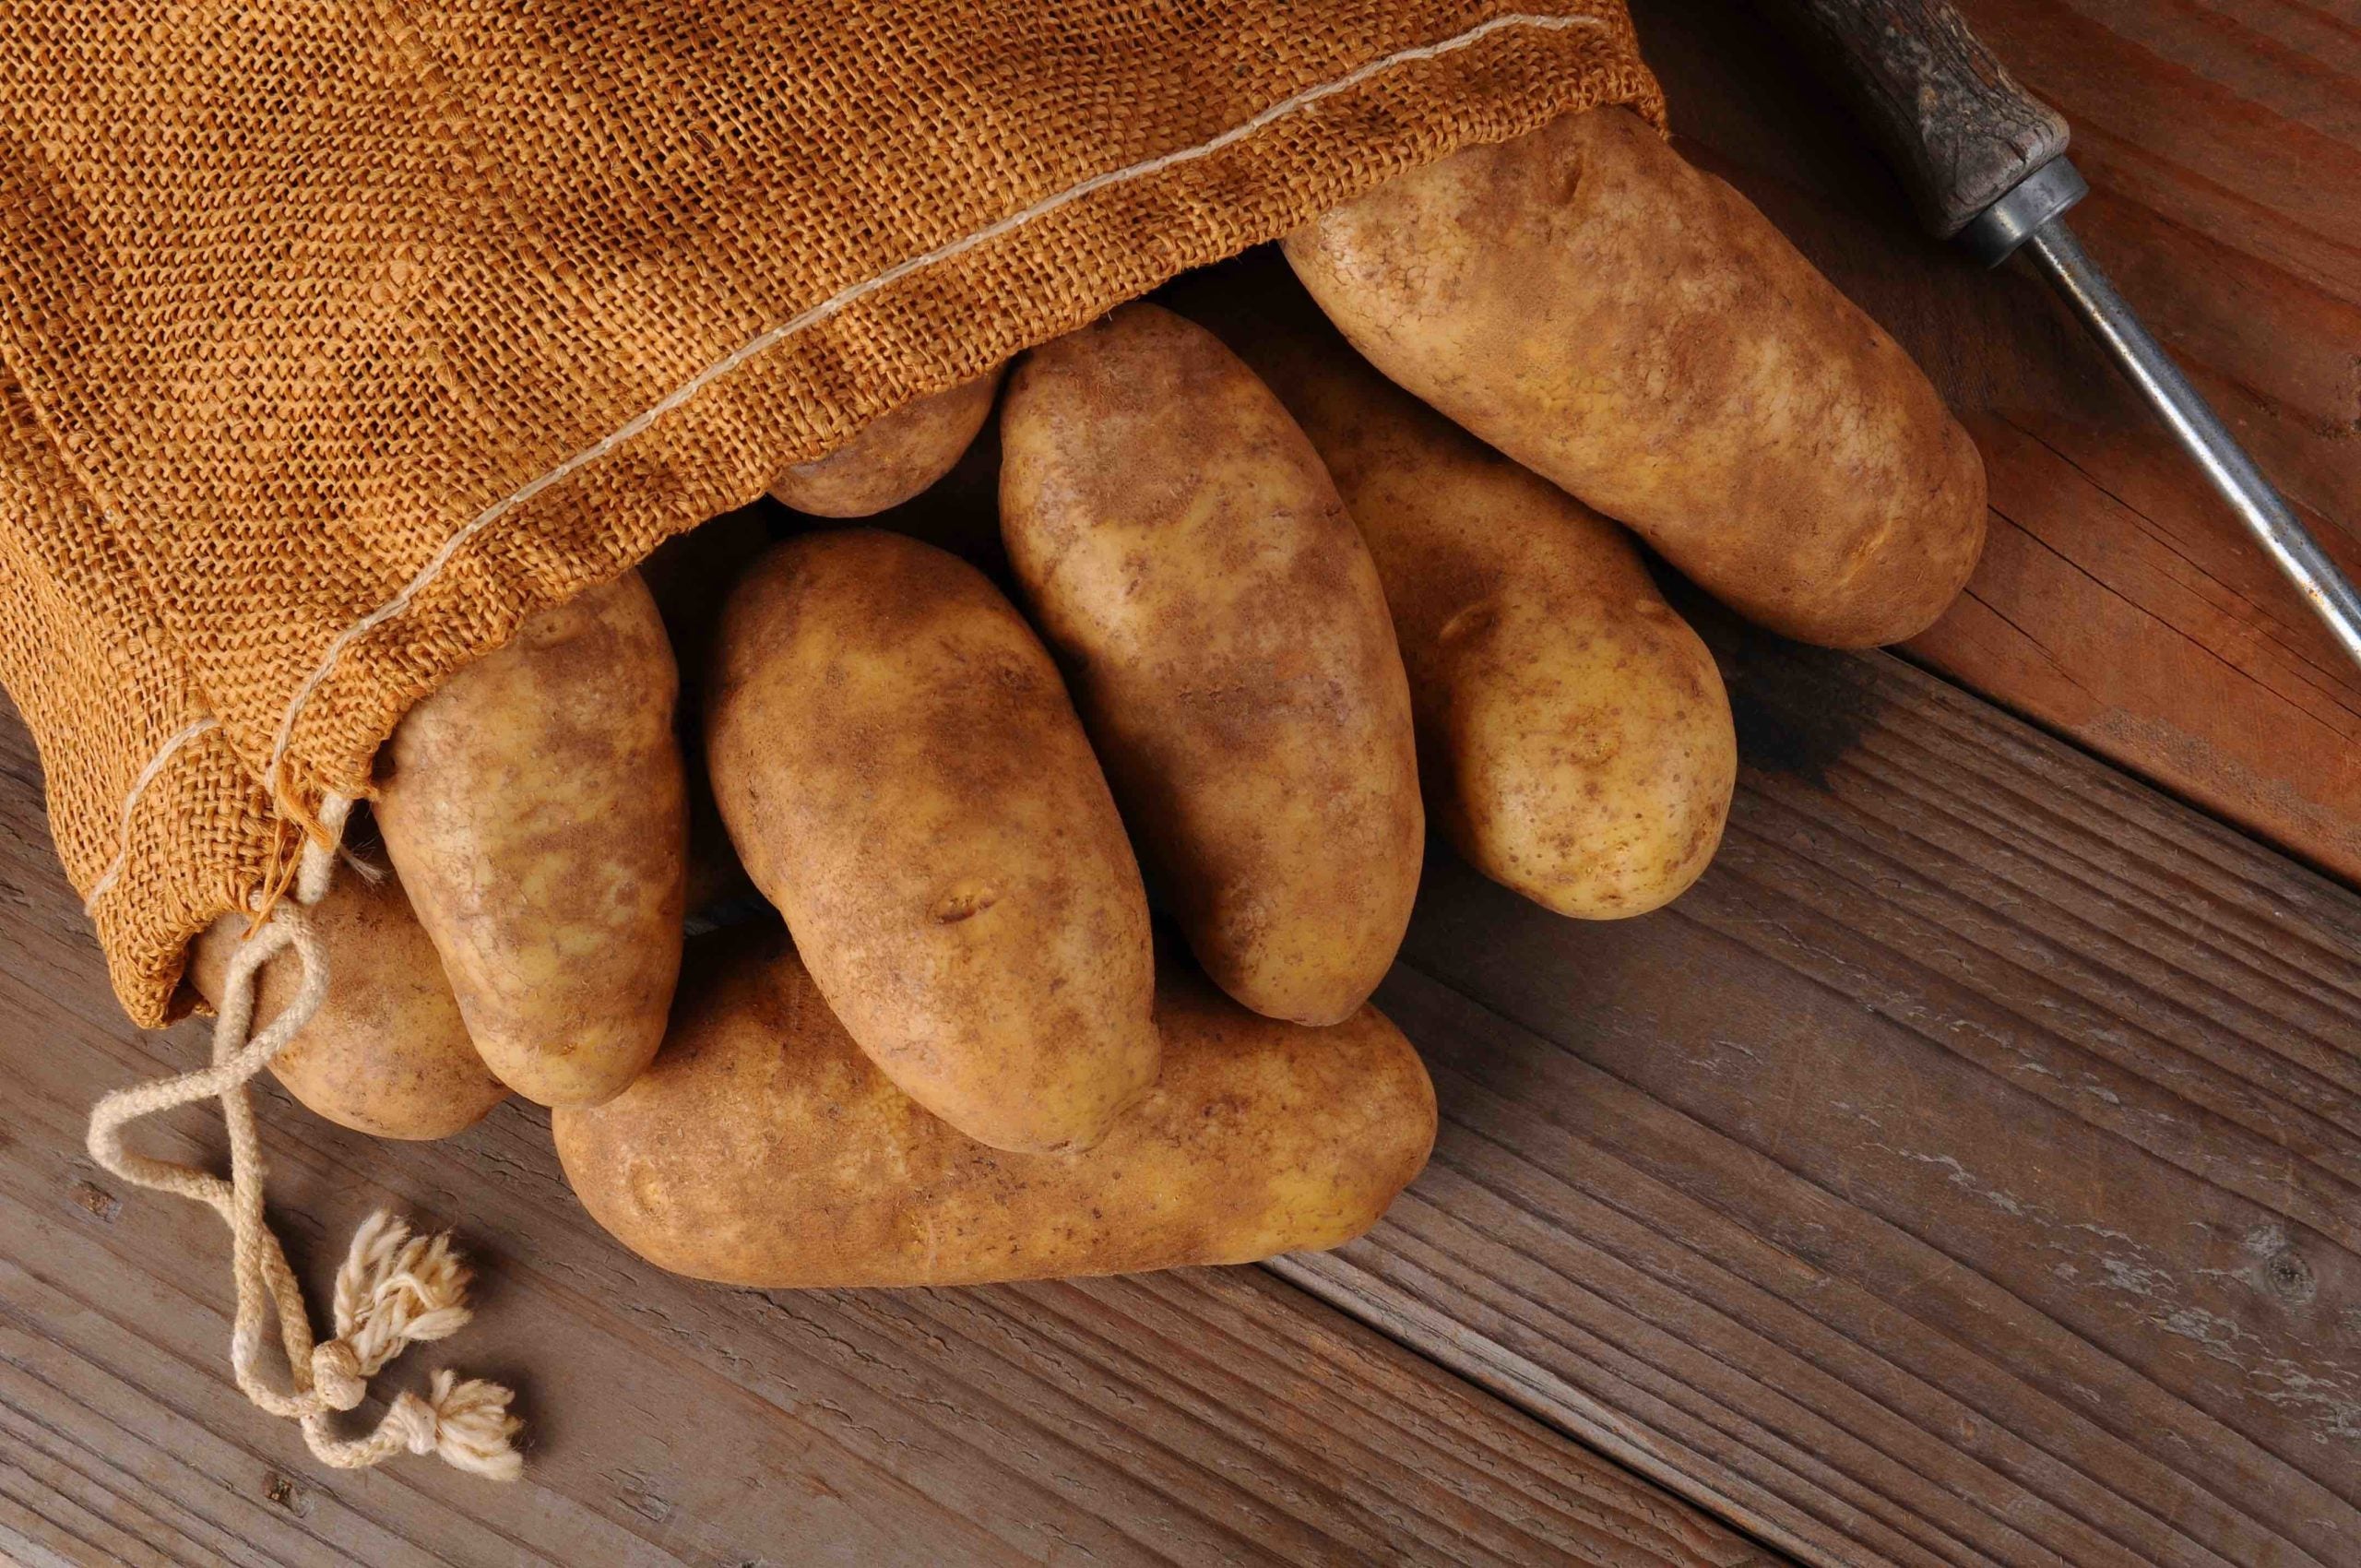 A overhead view of a burlap sack of potatoes on a rustic wooden background. 